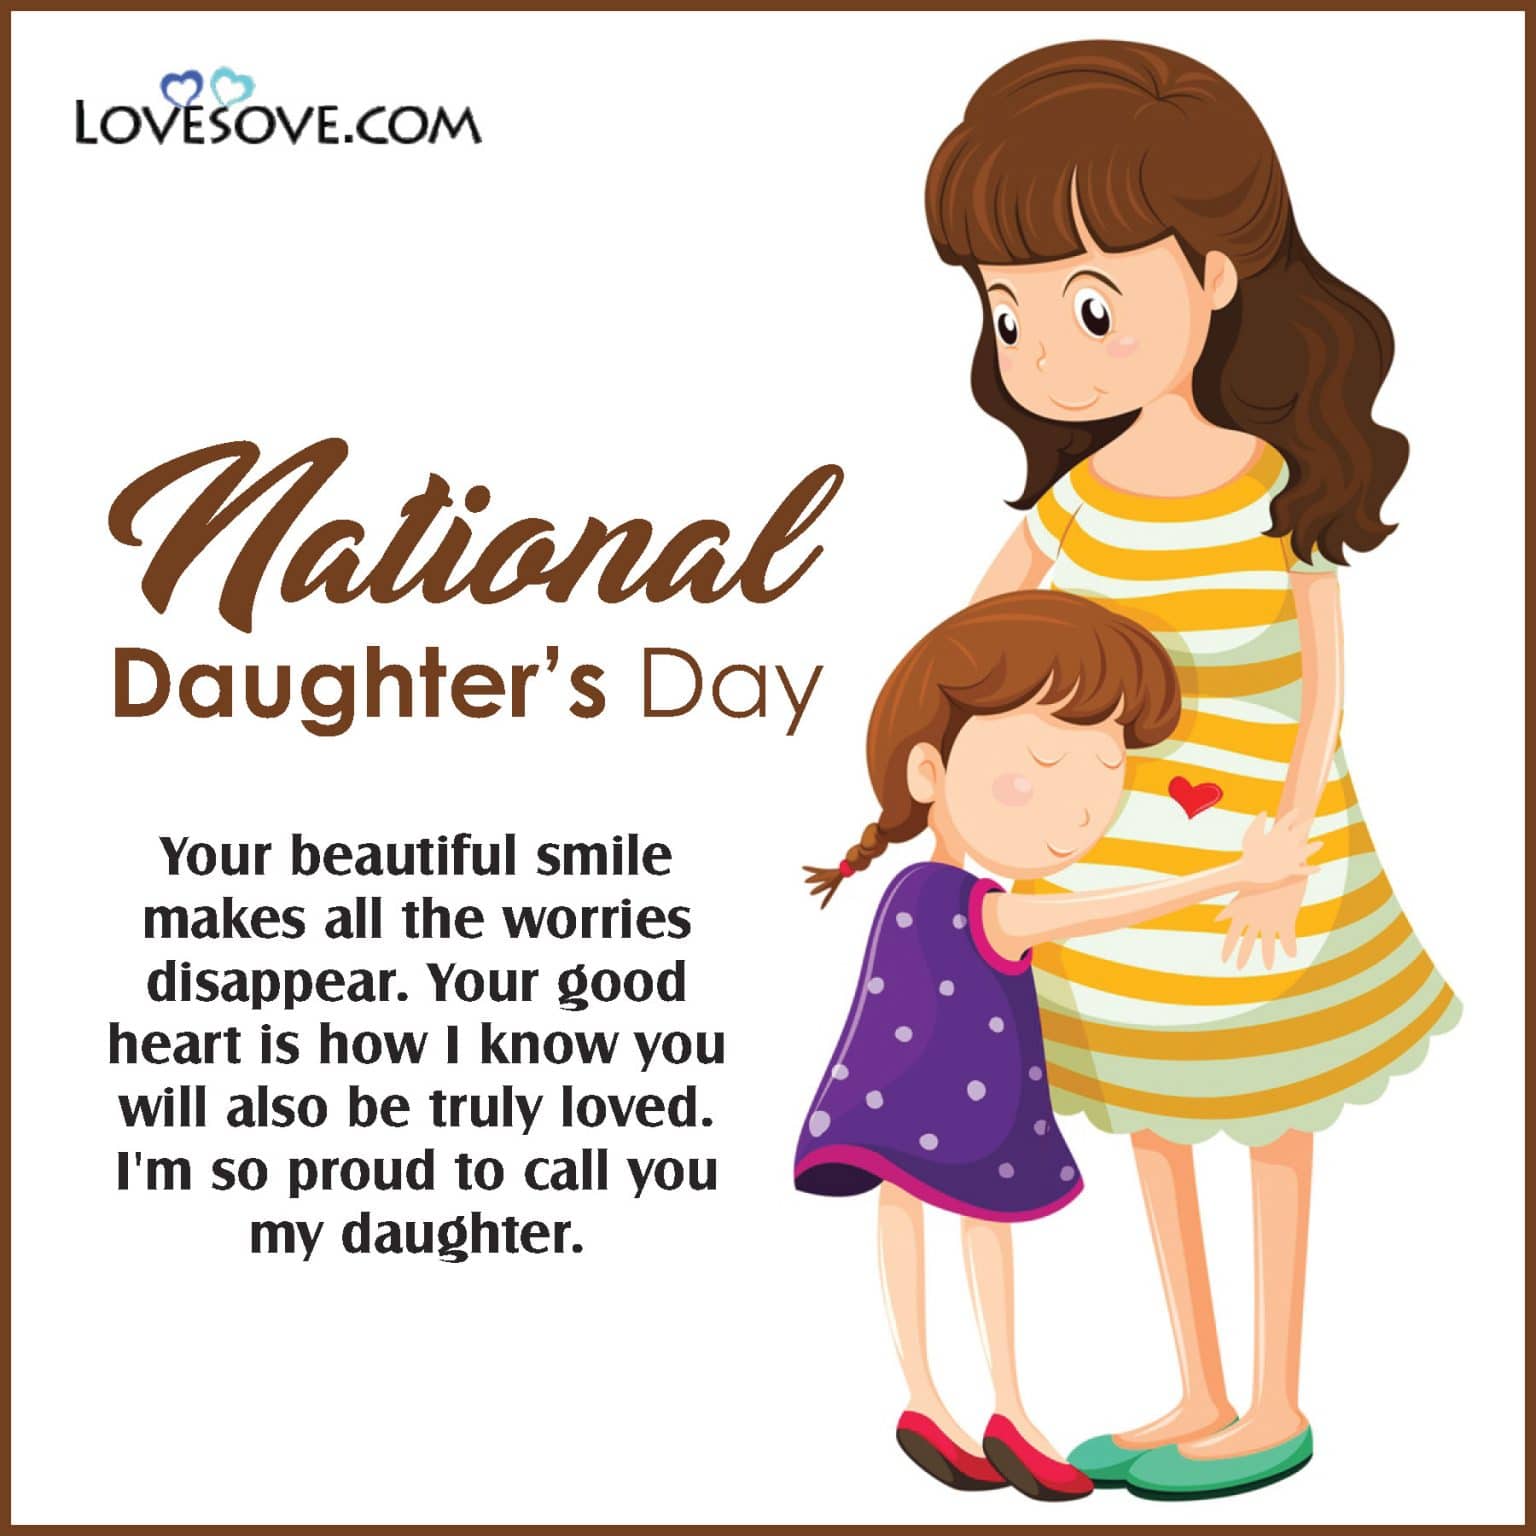 Daughters Day Wishes From Parents Lovesove 1536x1536 